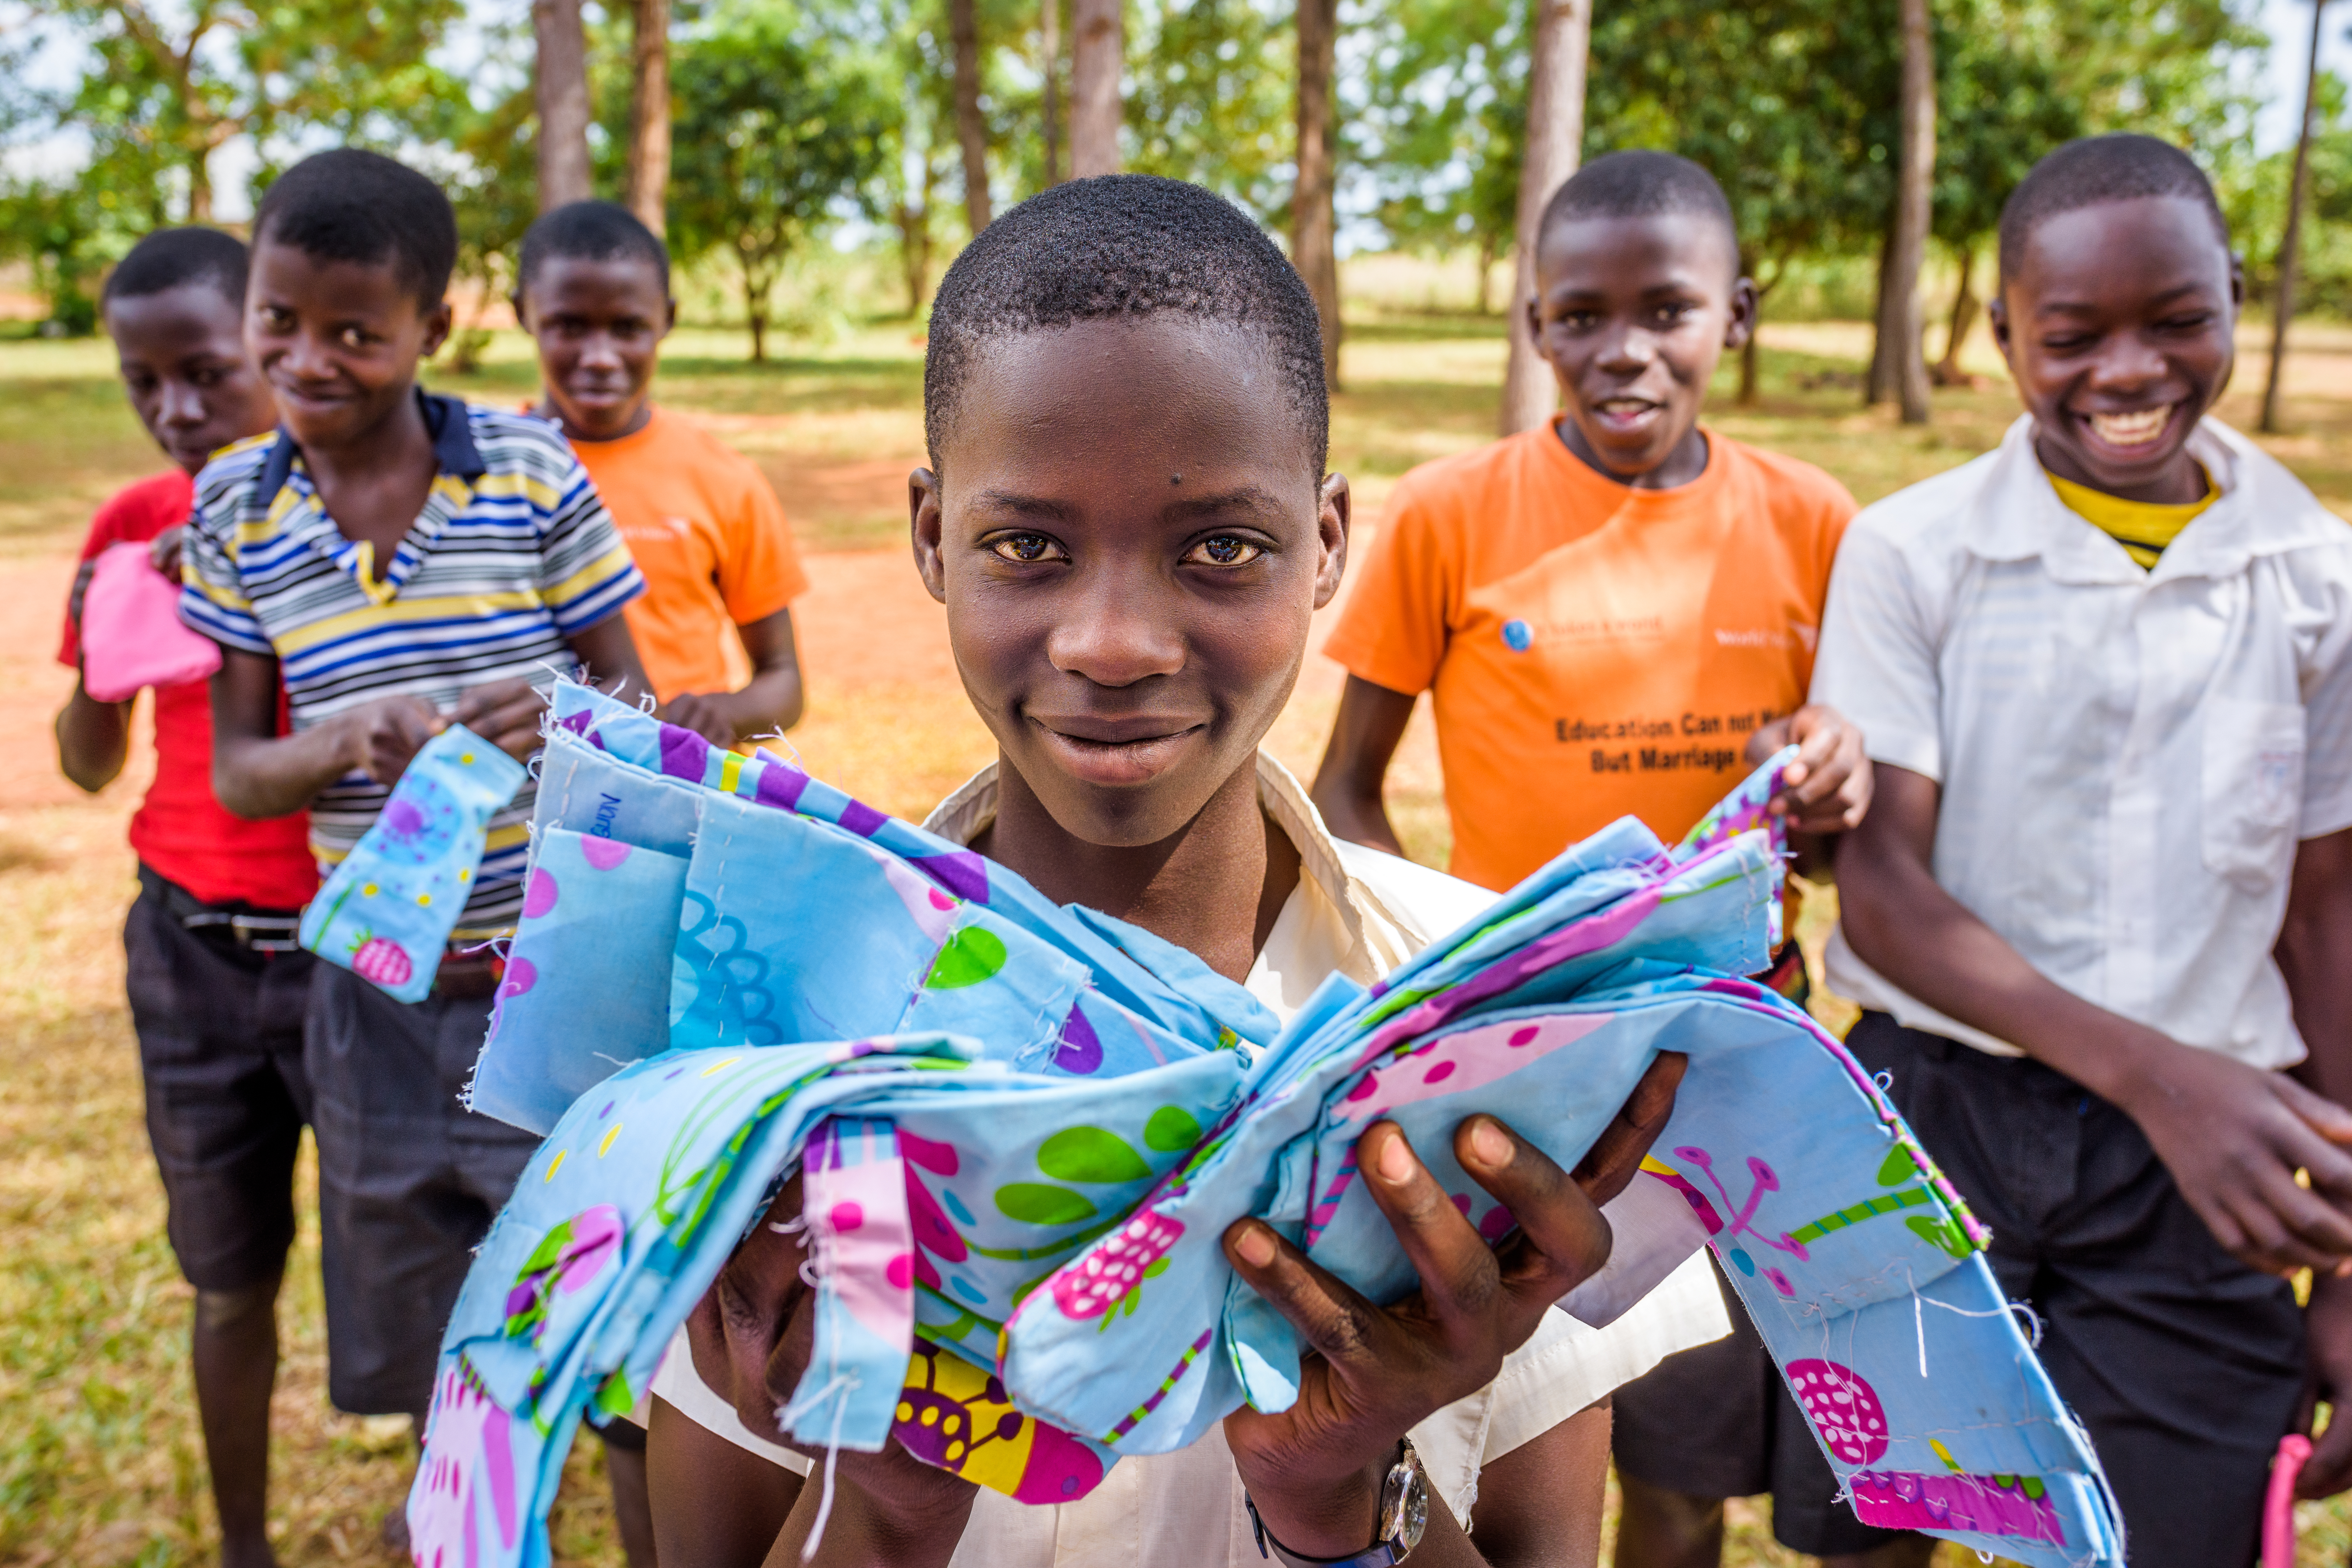 A group of Ugandan schoolboys showing off the reusable sanitary pads they created in class.